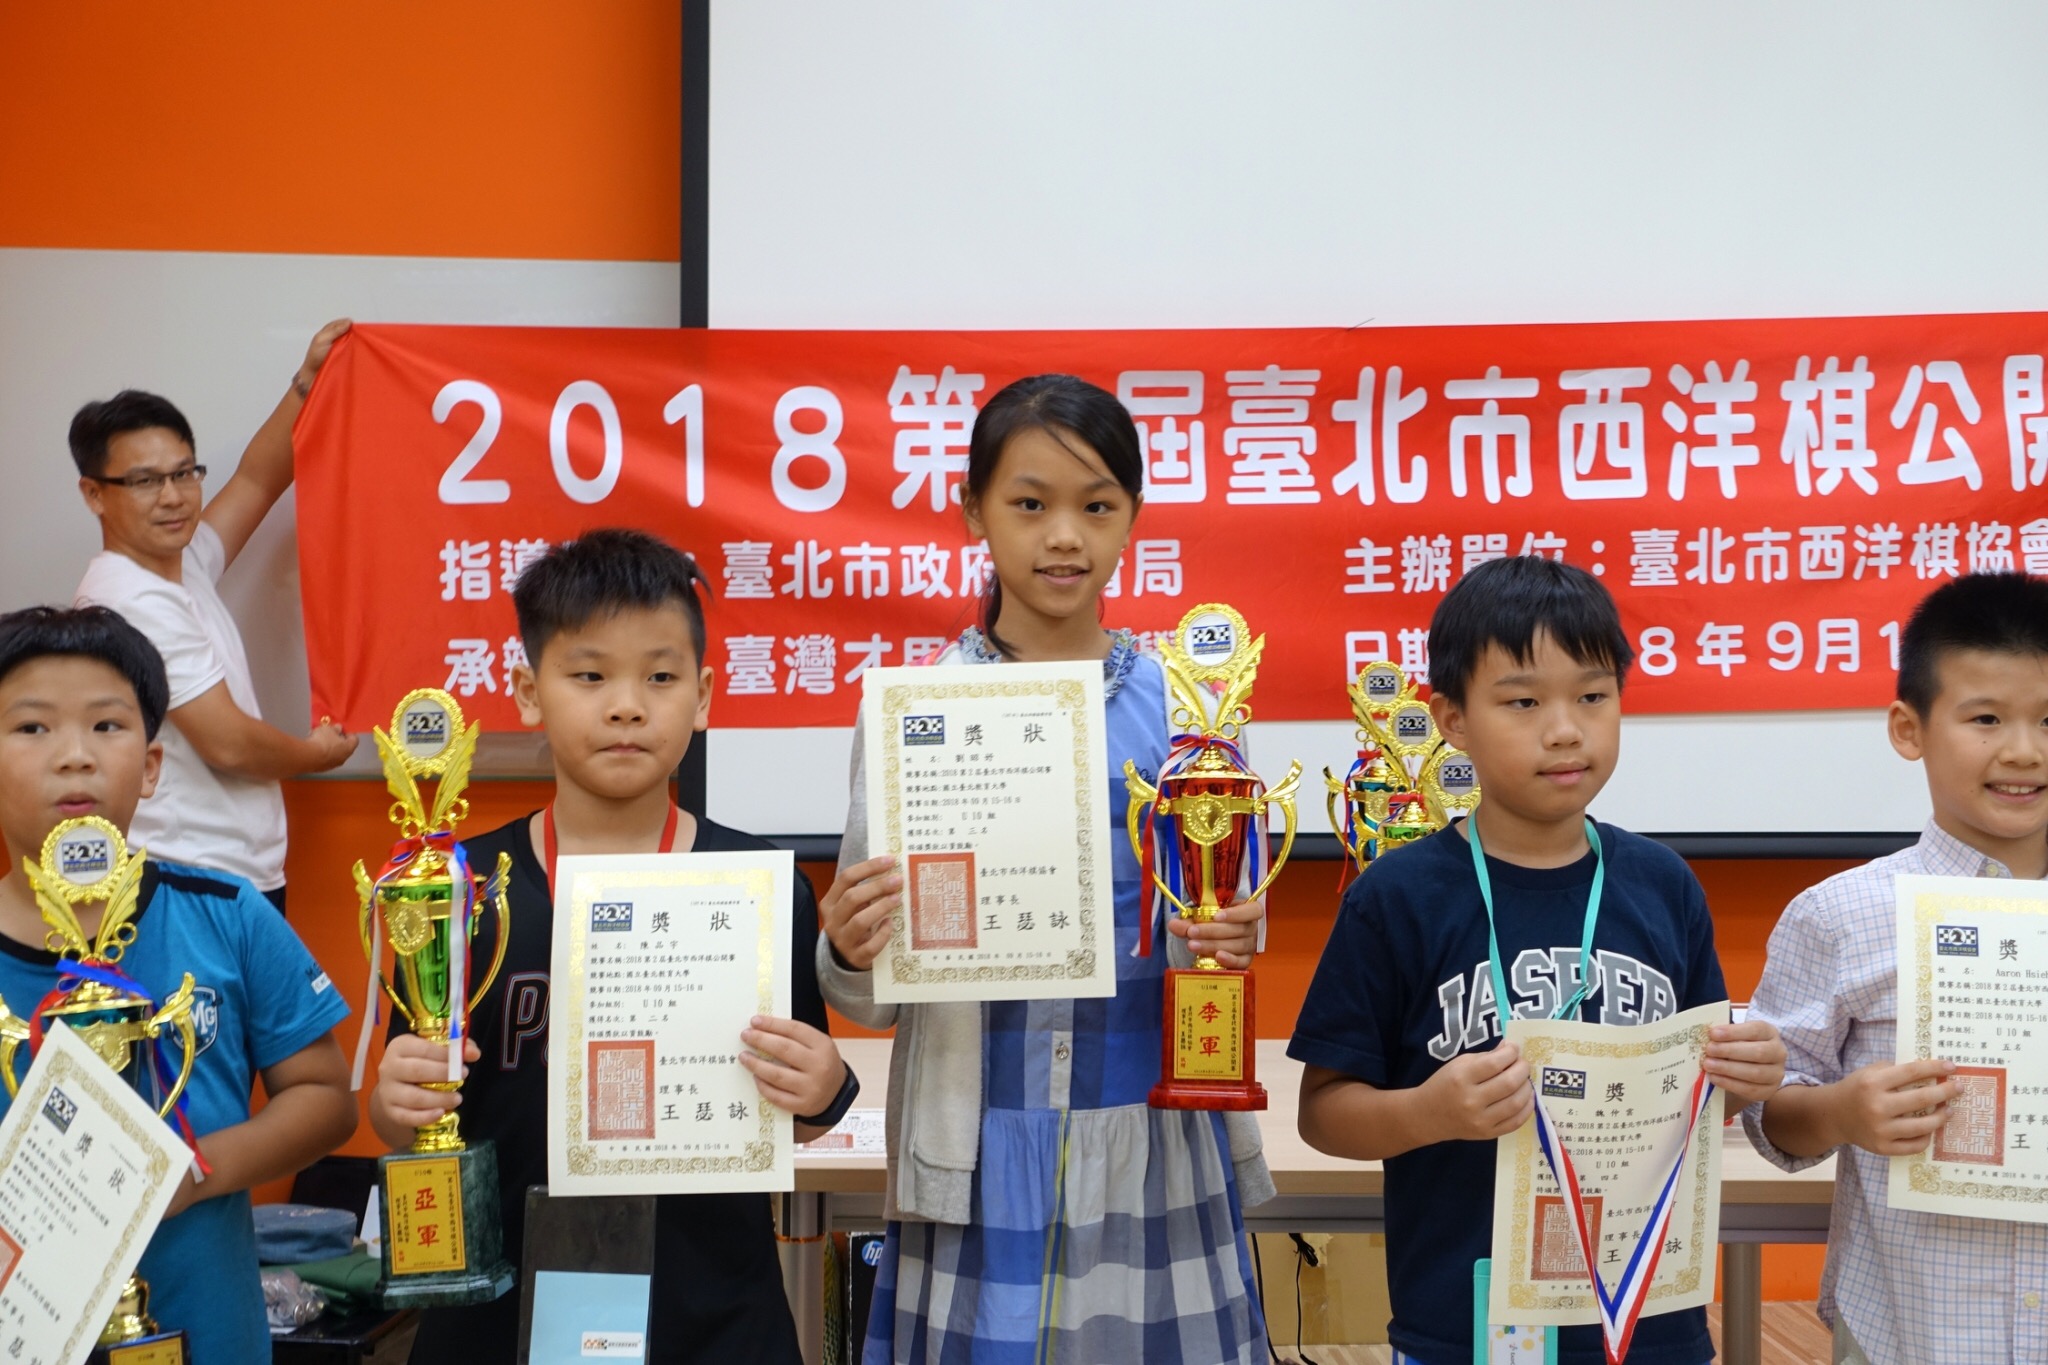 Our coaches & pupils joined 2018 Taipei 2nd Edition Chess Open o 9/15-16 performed well.